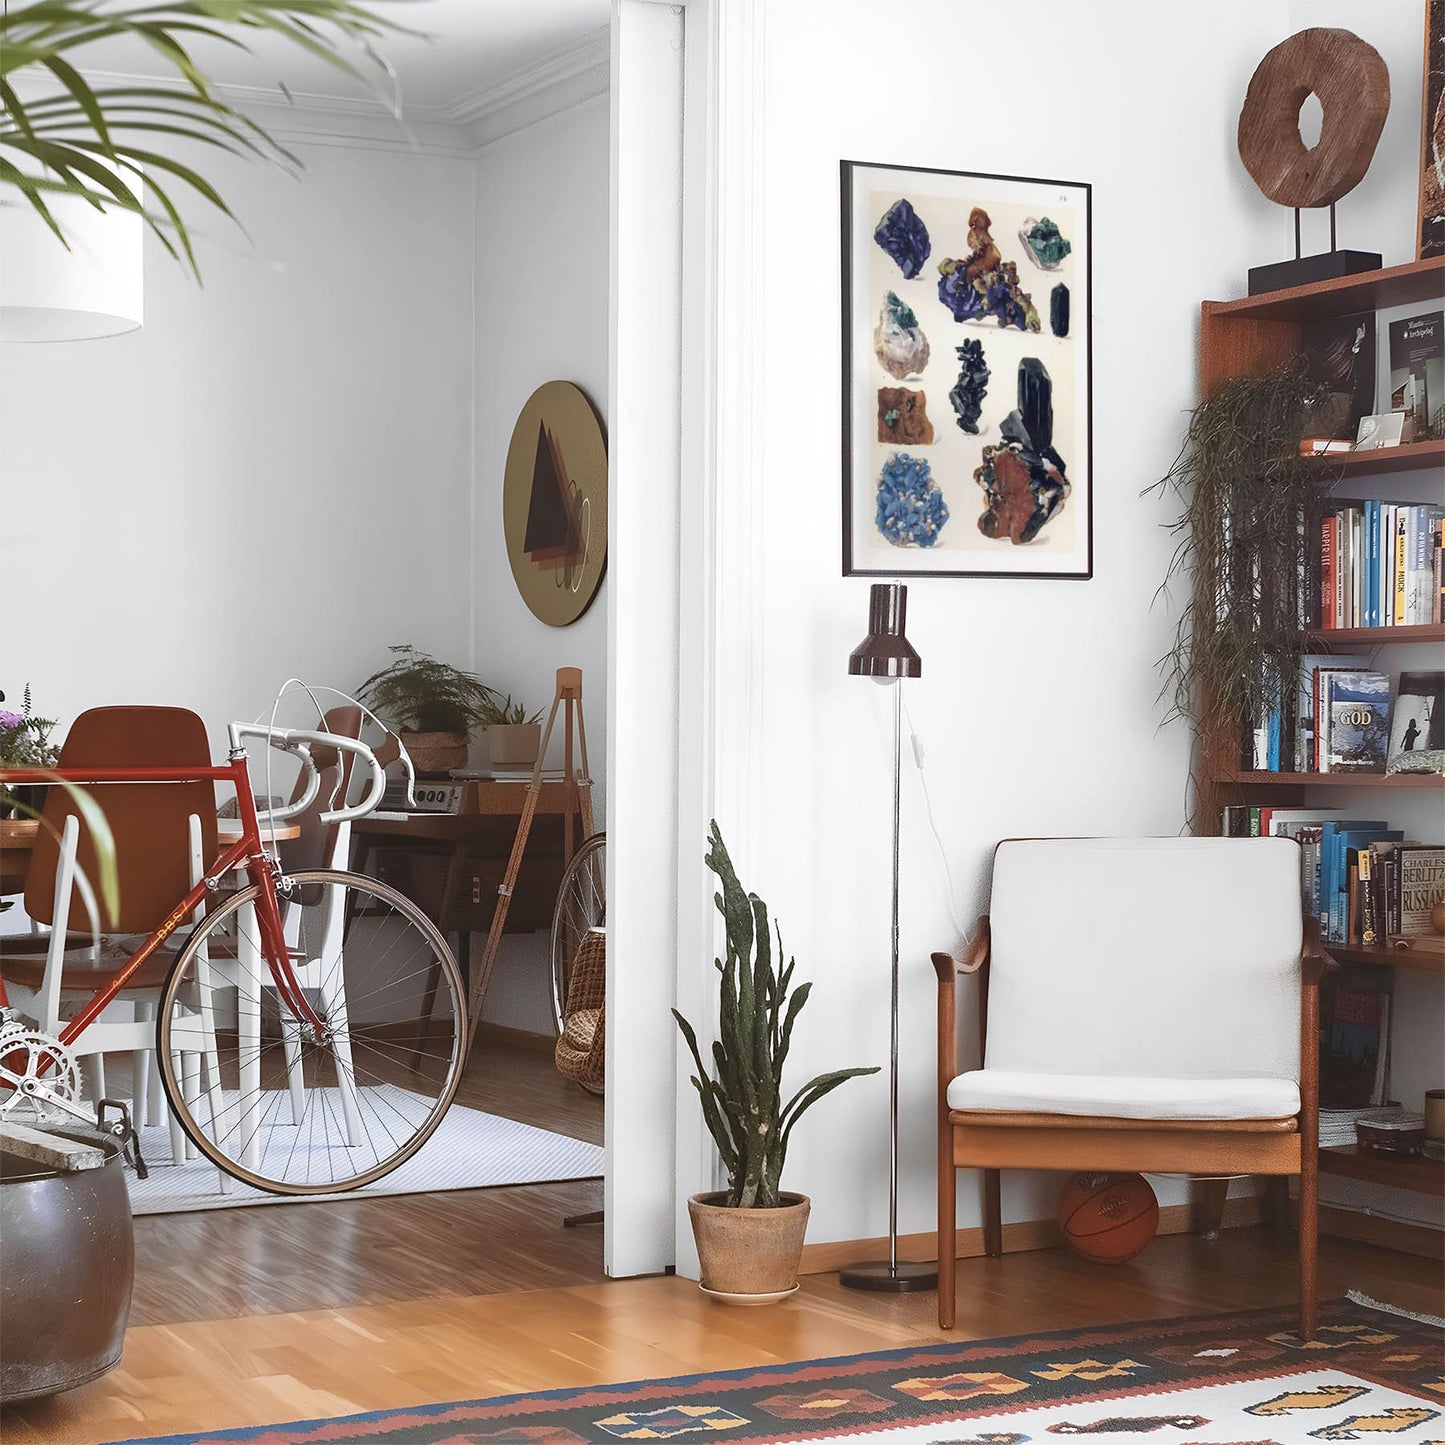 Eclectic living room with a road bike, bookshelf and house plants that features framed artwork of a Purple, Blue and Multi-Color Gems above a chair and lamp